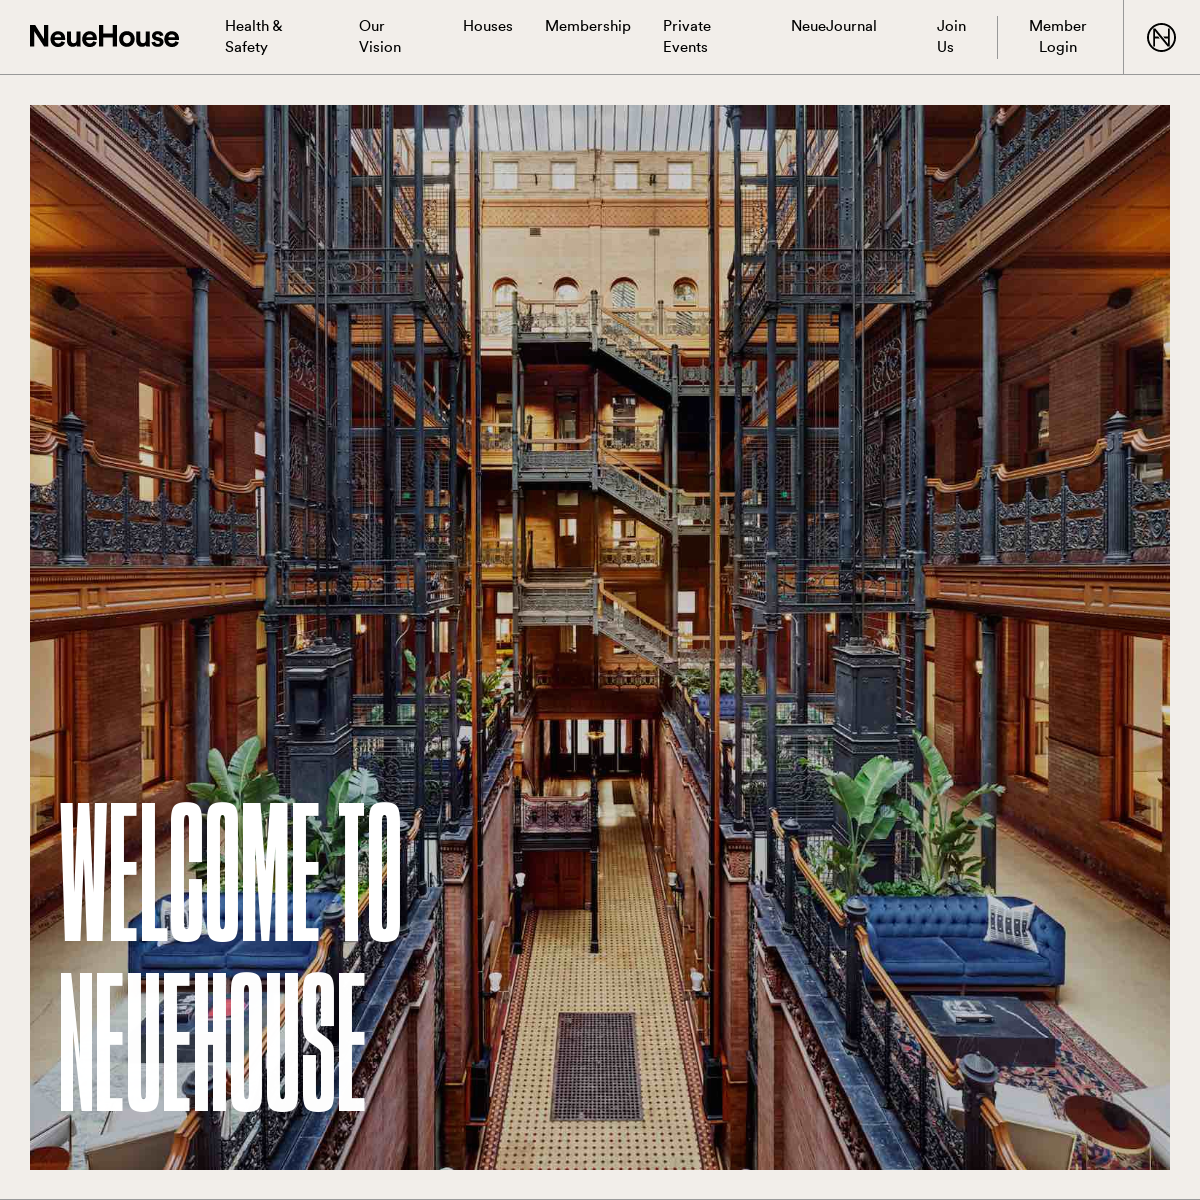 A complete backup of neuehouse.com